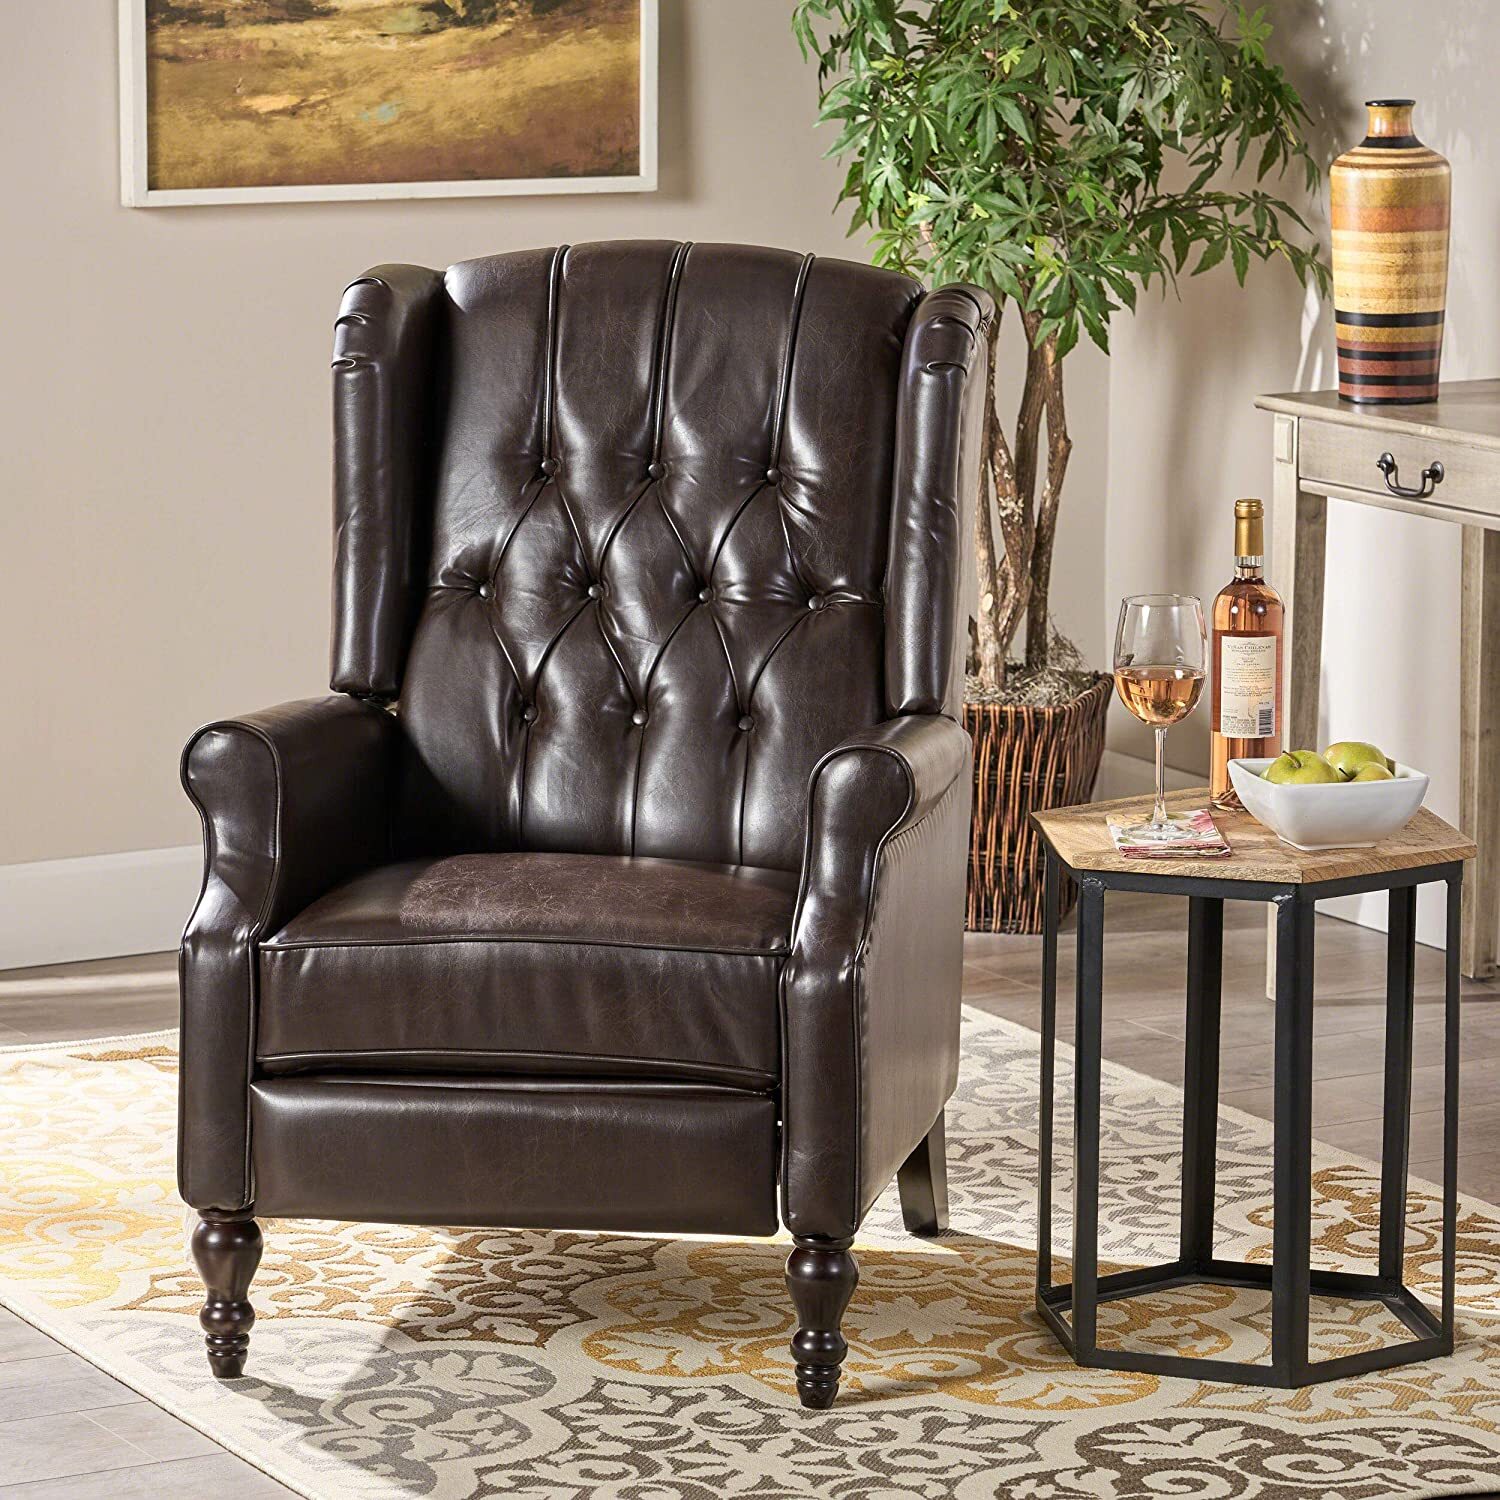 Antique & opulent leather cigar chairs